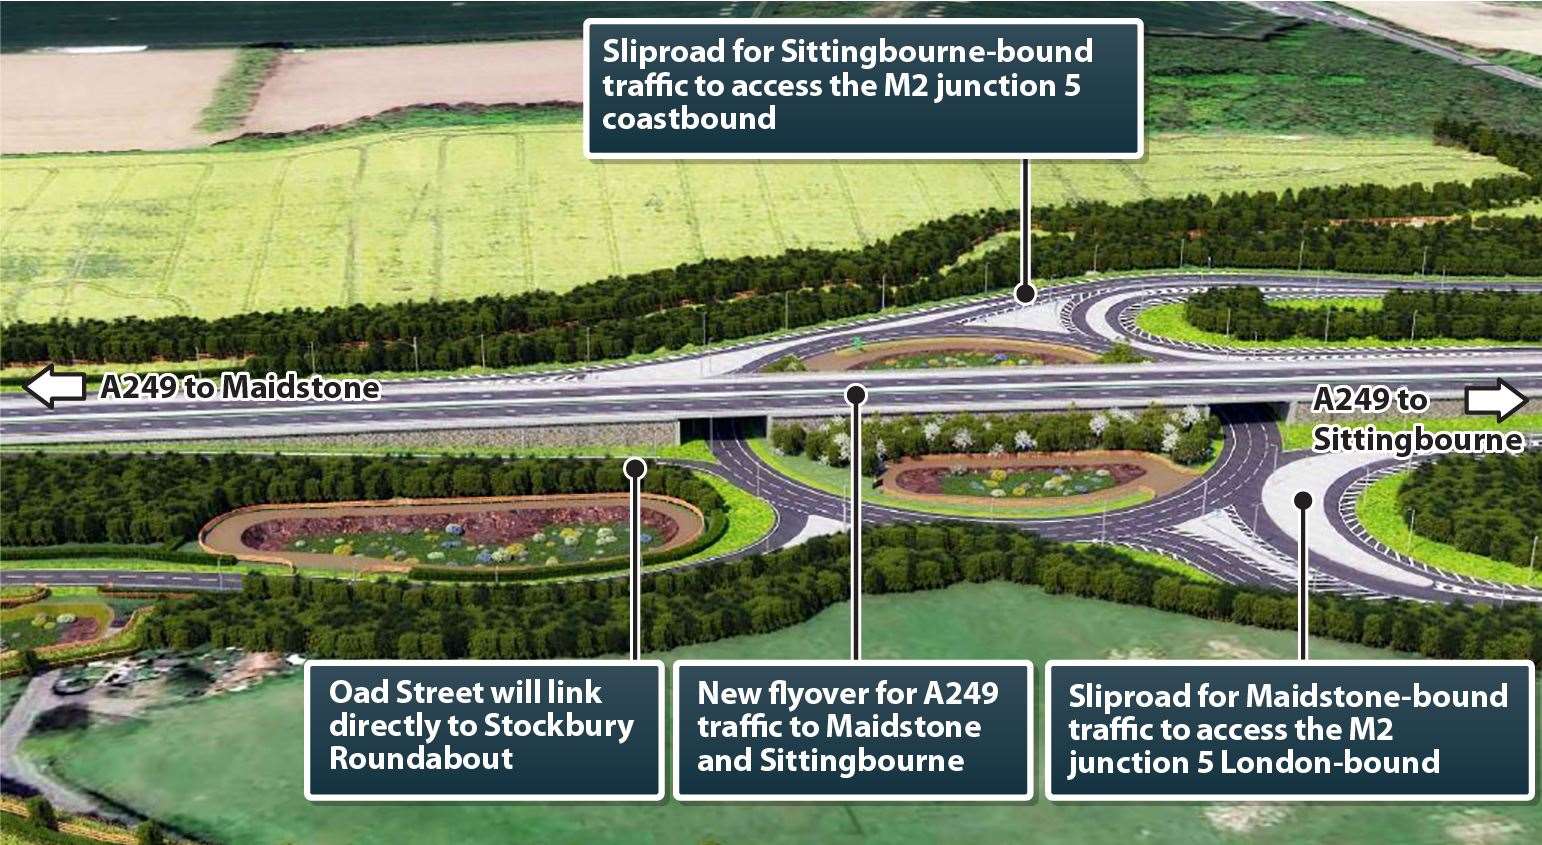 What an upgraded Stockbury Roundabout could look like